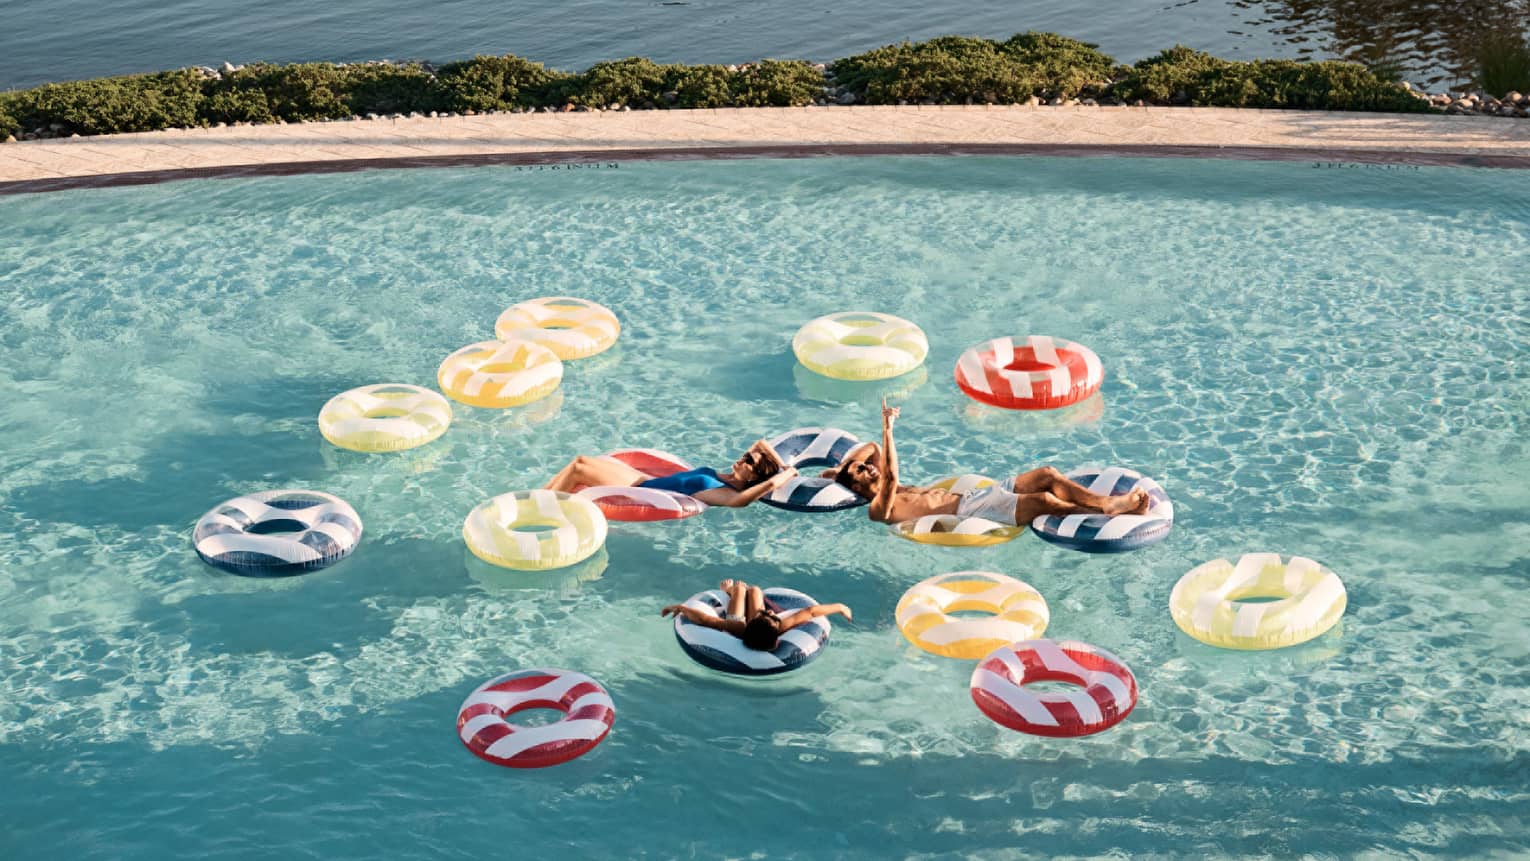 Guests floating on floats in a pool.